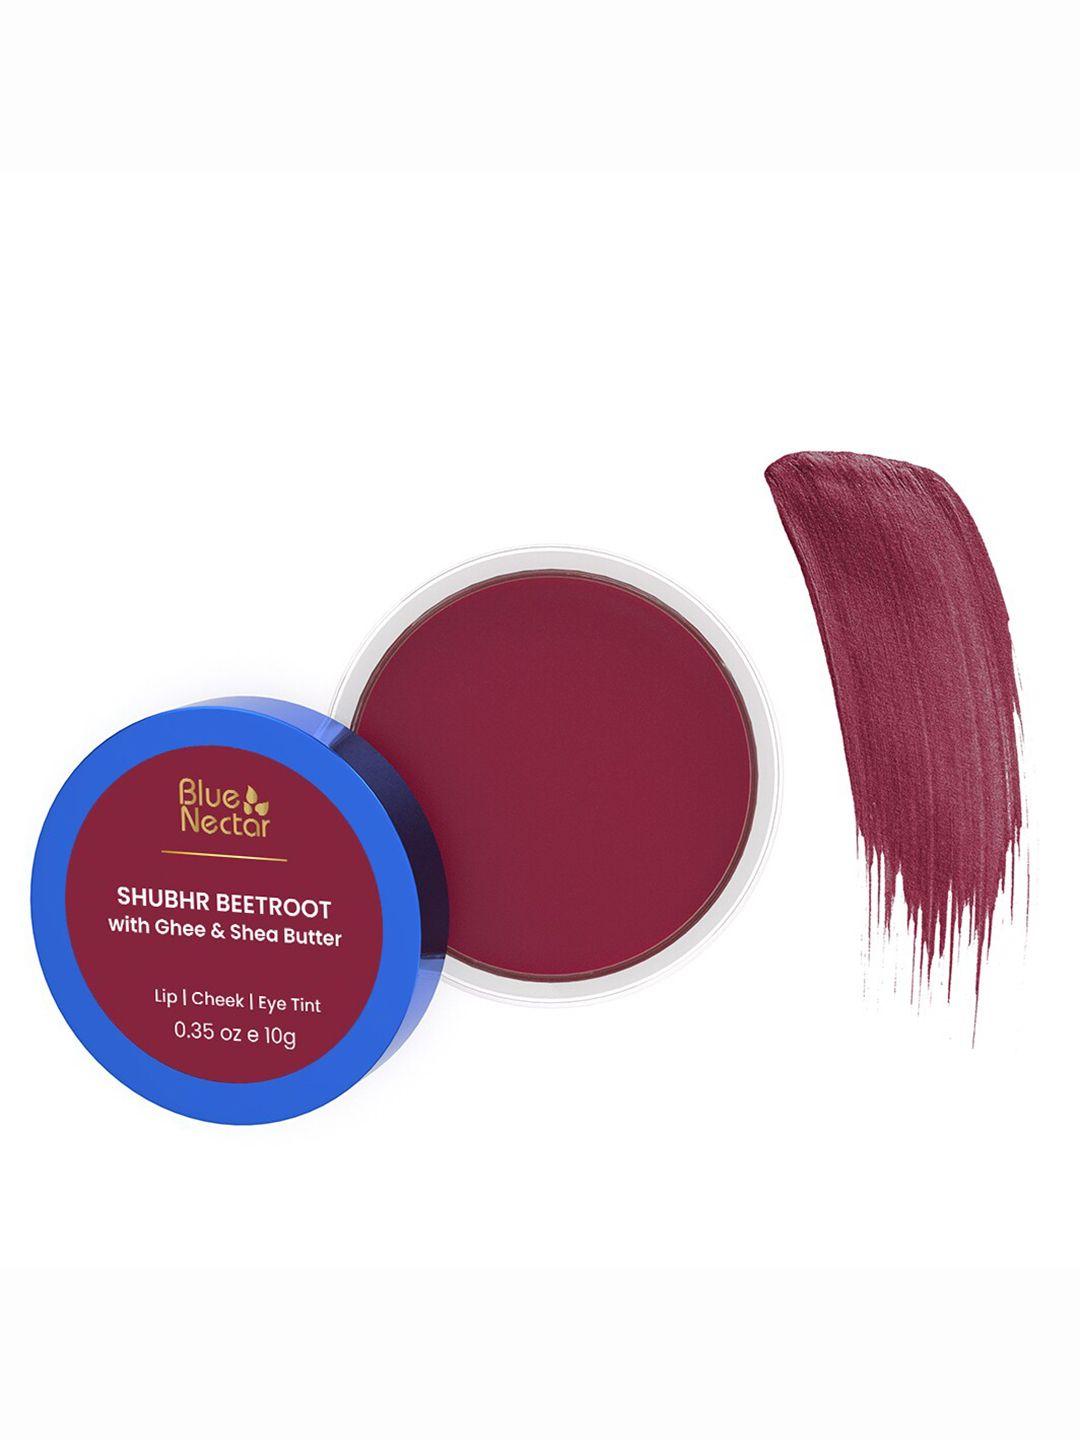 blue-nectar-shubhr-beetroot-lip-&-cheek-tint-with-ghee-&-shea-butter-10gm---beetroot-red